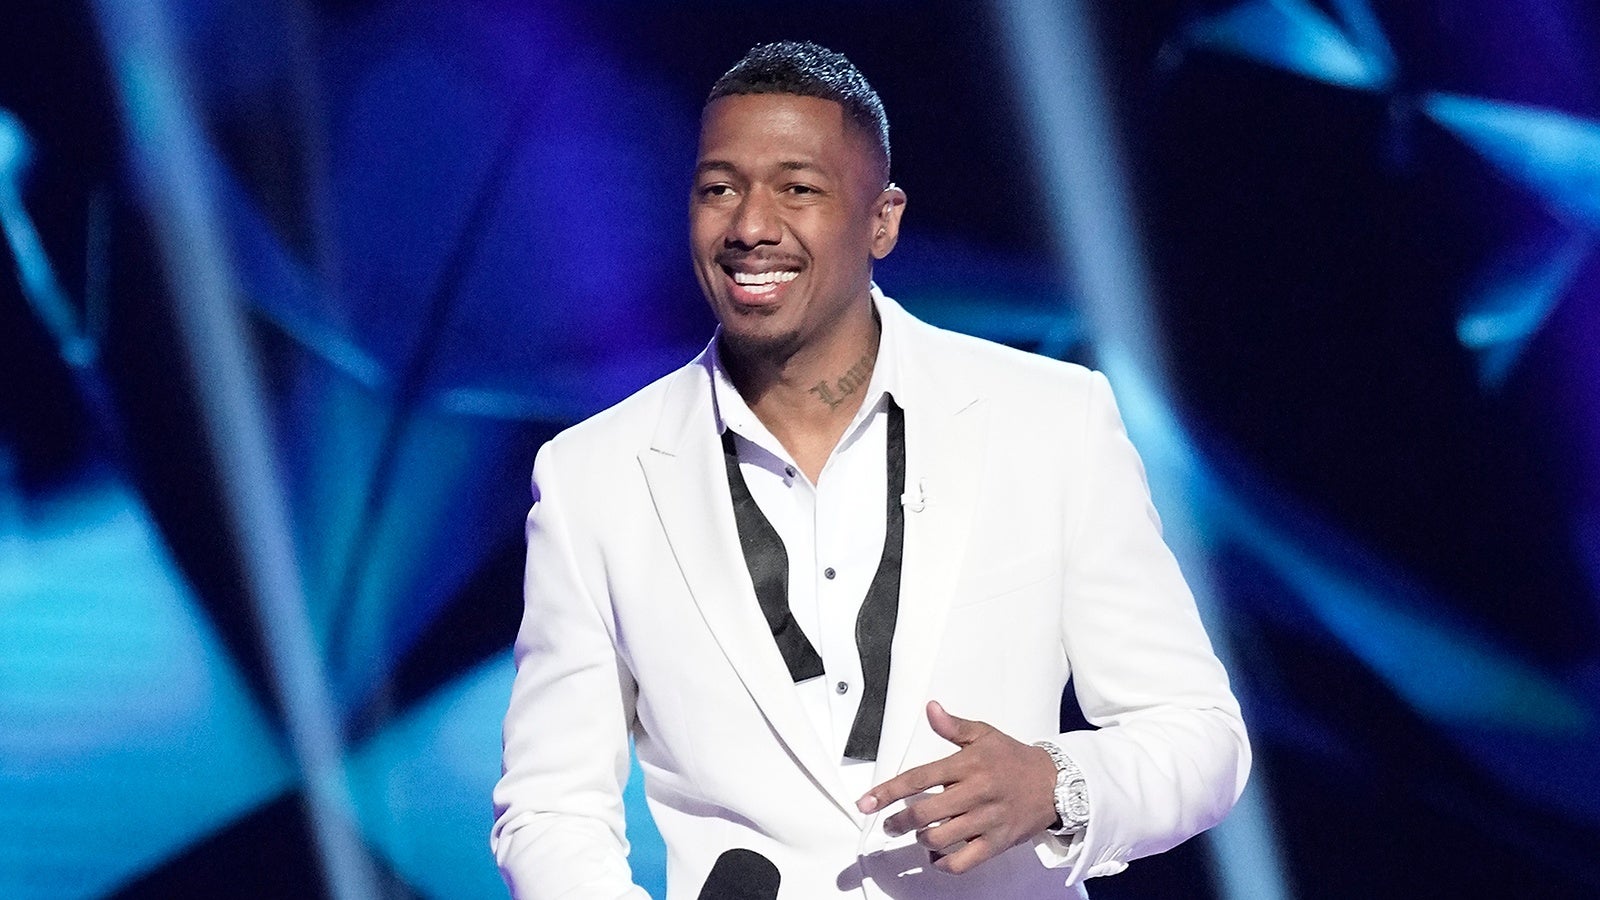 Nick Cannon Makes Good On Promise To Learn About The Jewish Community